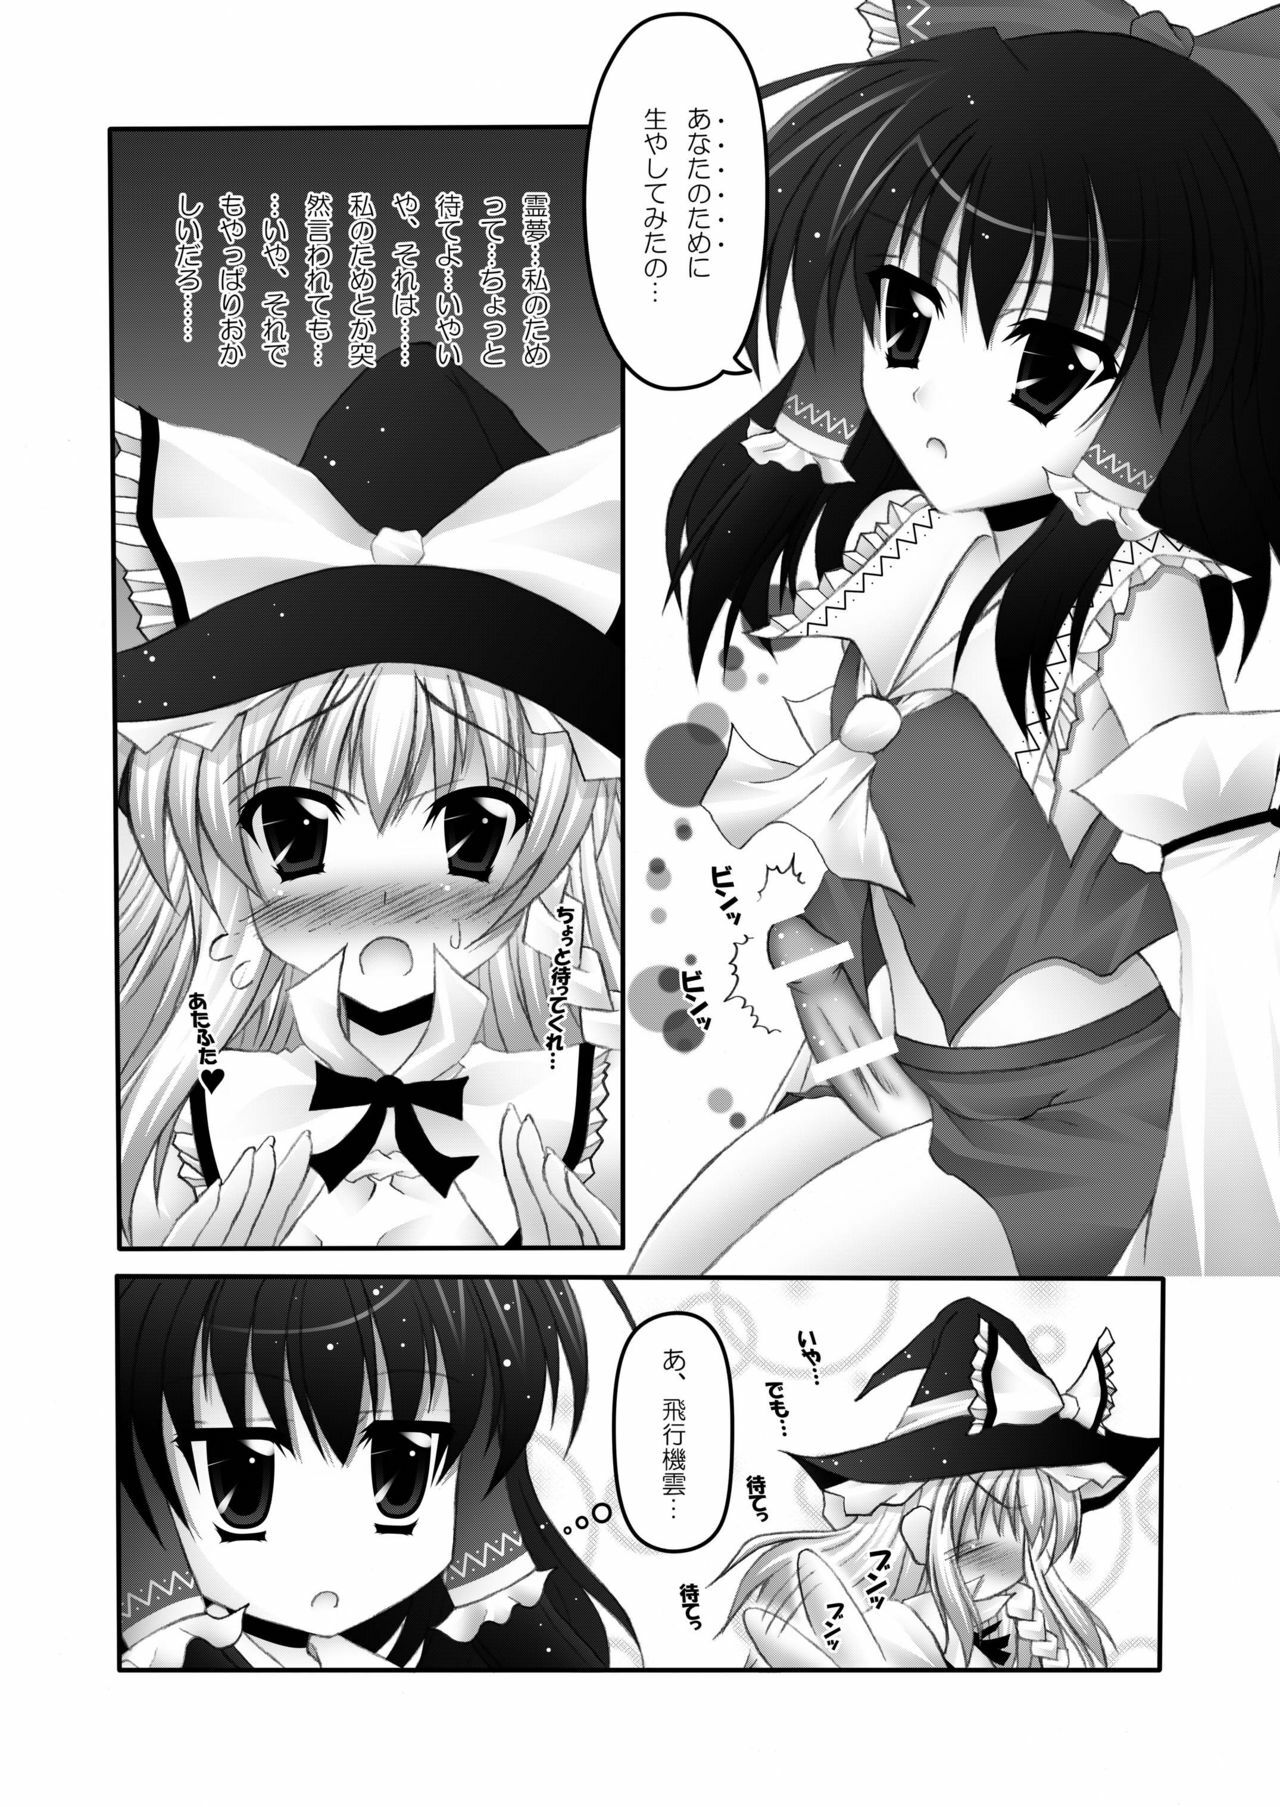 [Chronicle (YUKITO)] Only my wizard (Touhou Project) [Digital] page 20 full